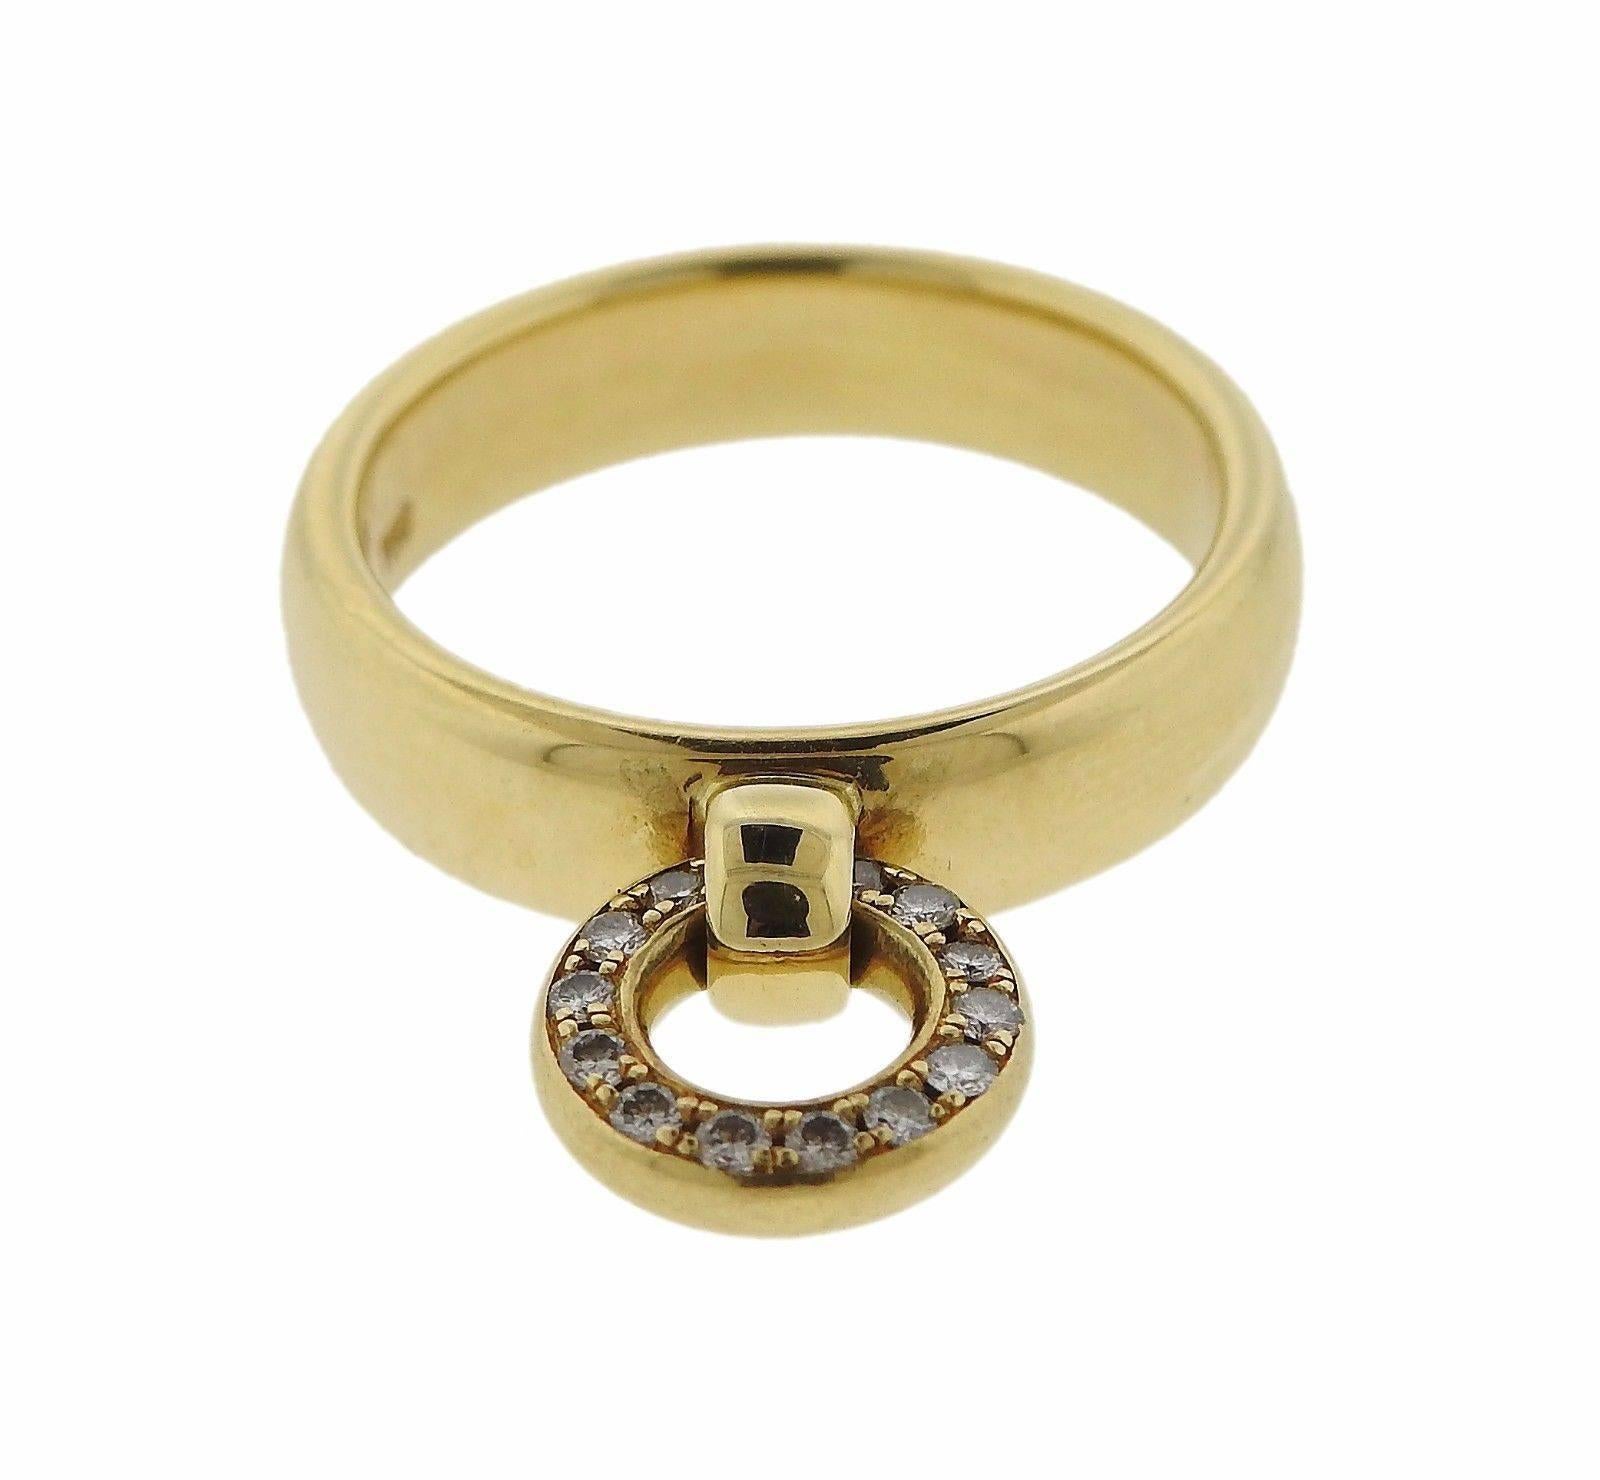 An 18k gold ring set with approximately 0.07ctw of G/VS diamonds.  The ring is a size 5 1/2, the band is 4.5mm wide and the charm is 9.2mm in diameter.  The weight of the piece is 7 grams. Marked: Tiffany & Co, 750, Israel.